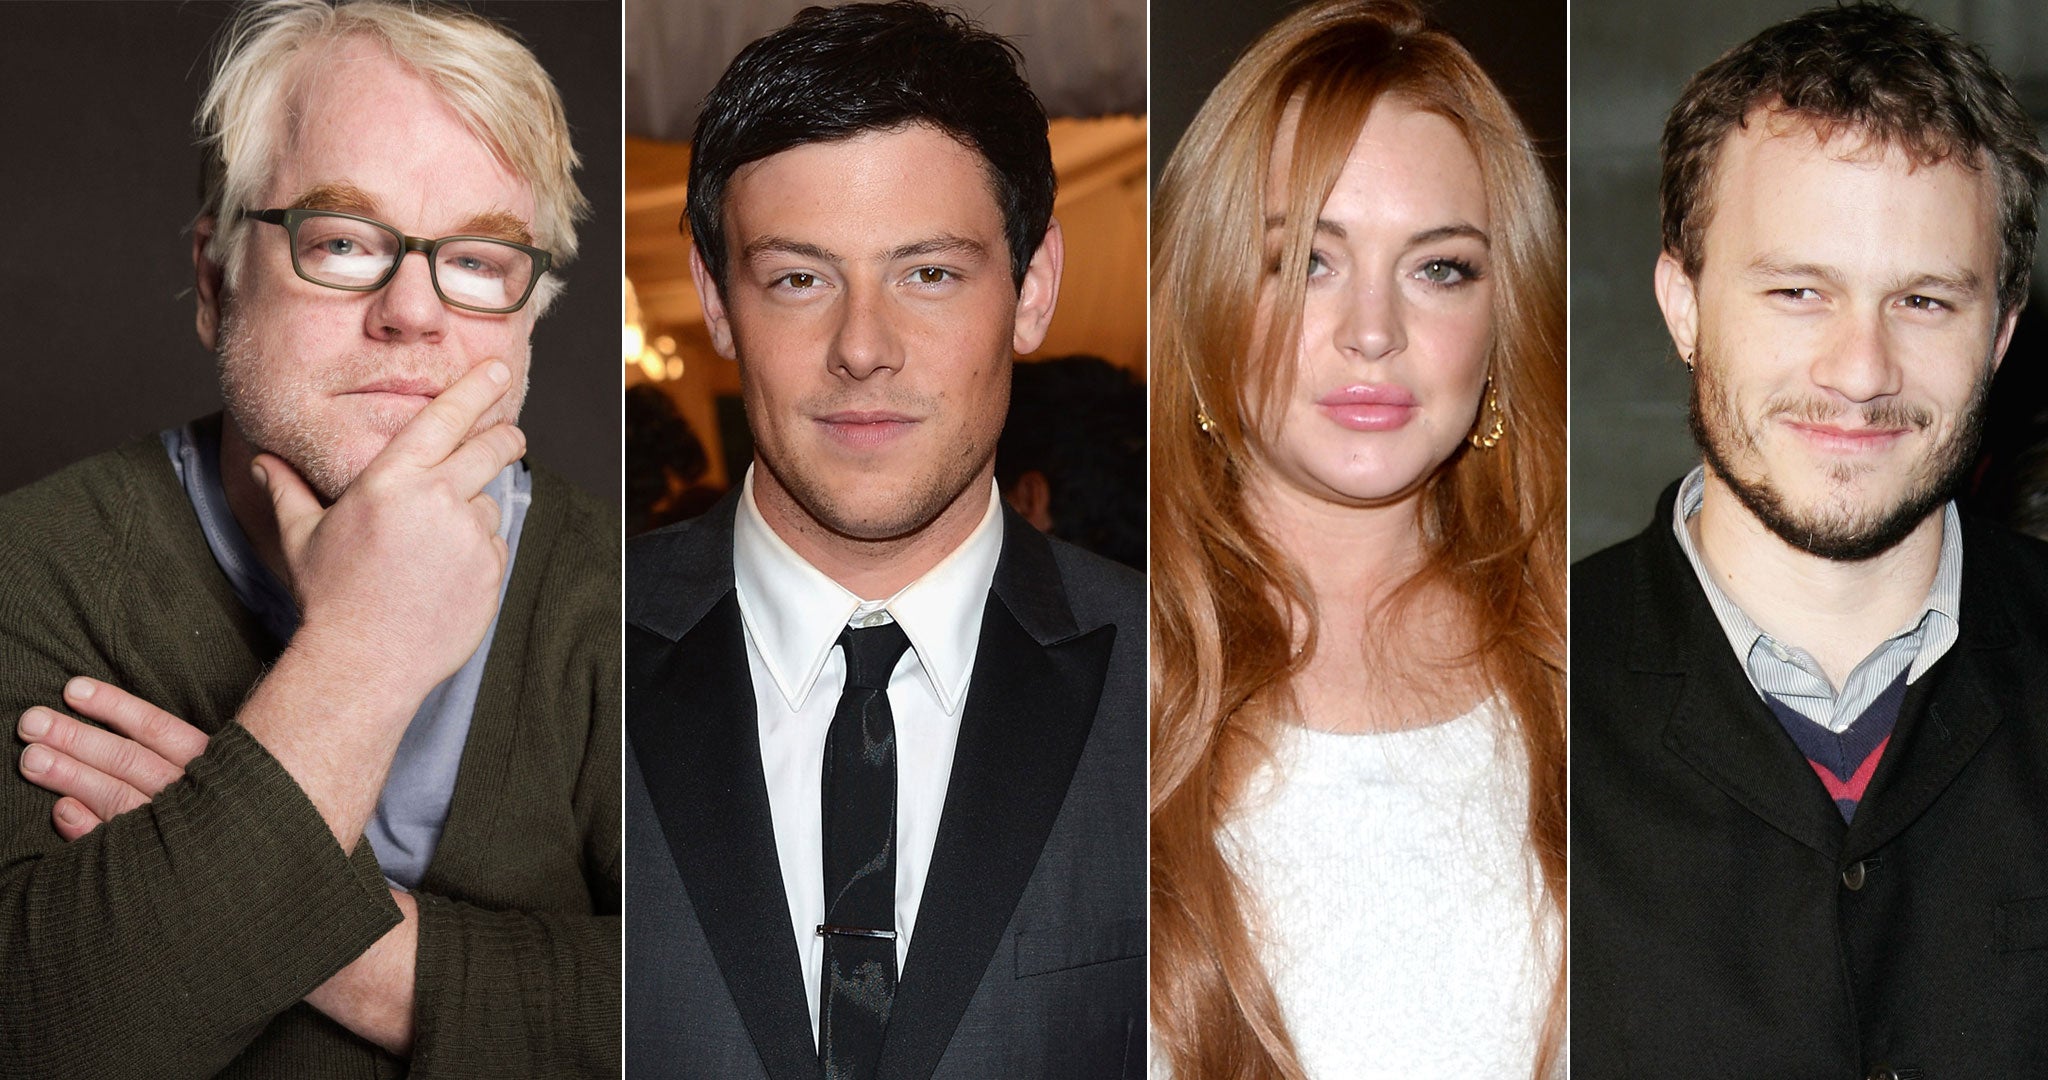 From left to right: Philip Seymour Hoffman; Cory Monteith; Lindsay Lohan and Heath Ledger